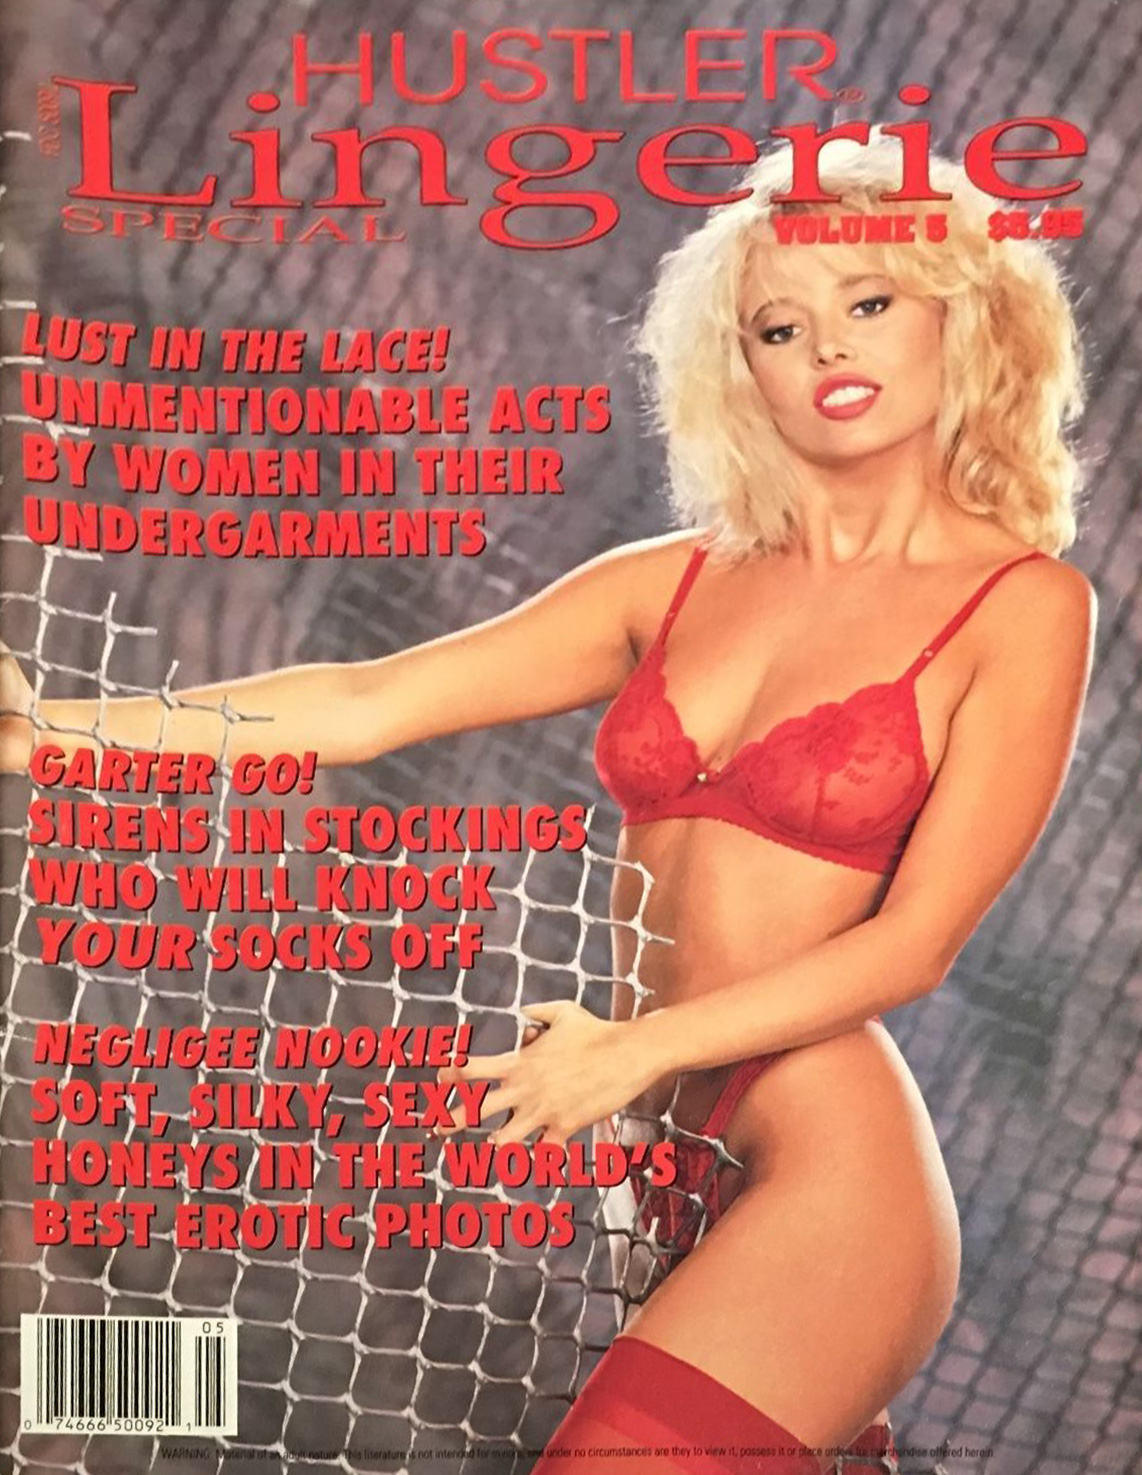 Hustler Lingerie # 5 magazine back issue Hustler Lingerie magizine back copy Hustler Lingerie # 5 Adult Pornographic Magazine Back Issue Published by LFP, Larry Flynt Publications. Lust In The Lace! Unmentionable Acts By Women In Their Undergarments.